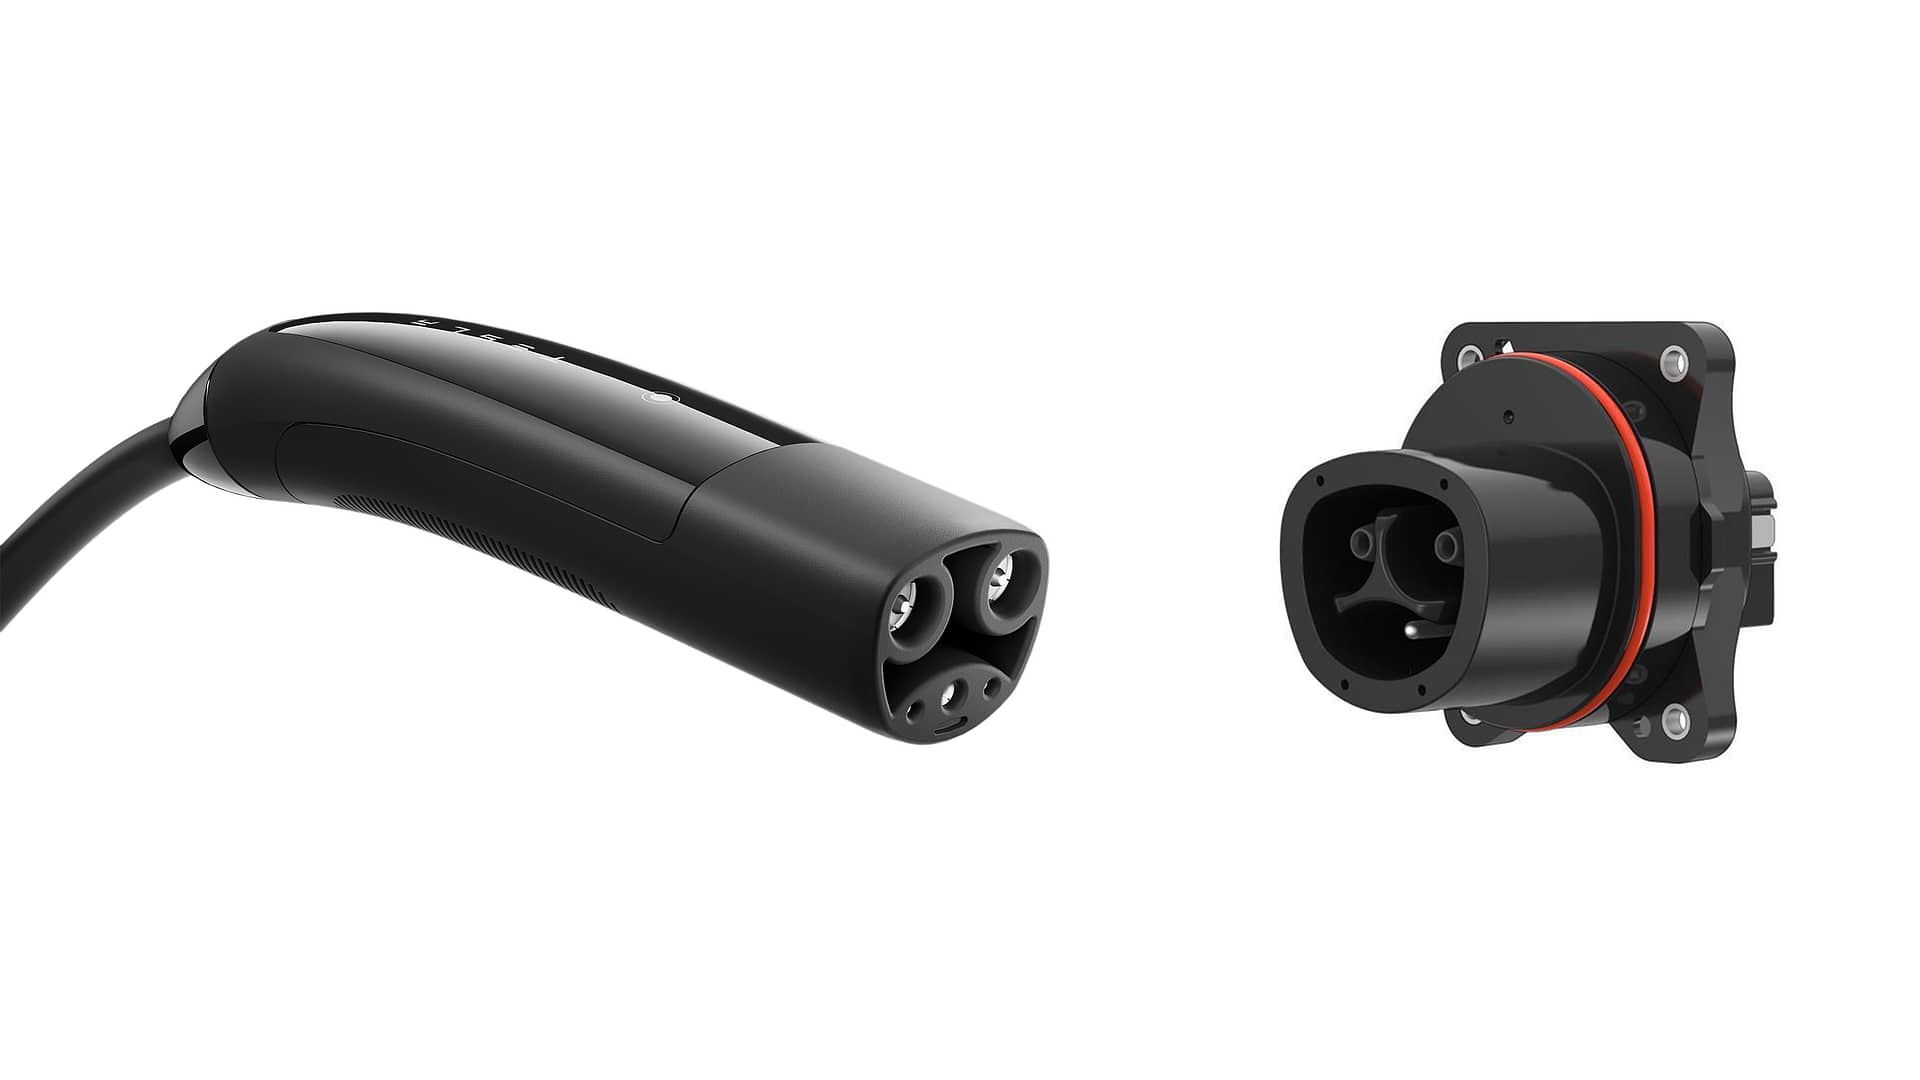 Tesla releasing its specs and production designs for the J1772 connector, which it is rebranding as the North American Charging Standard NACS